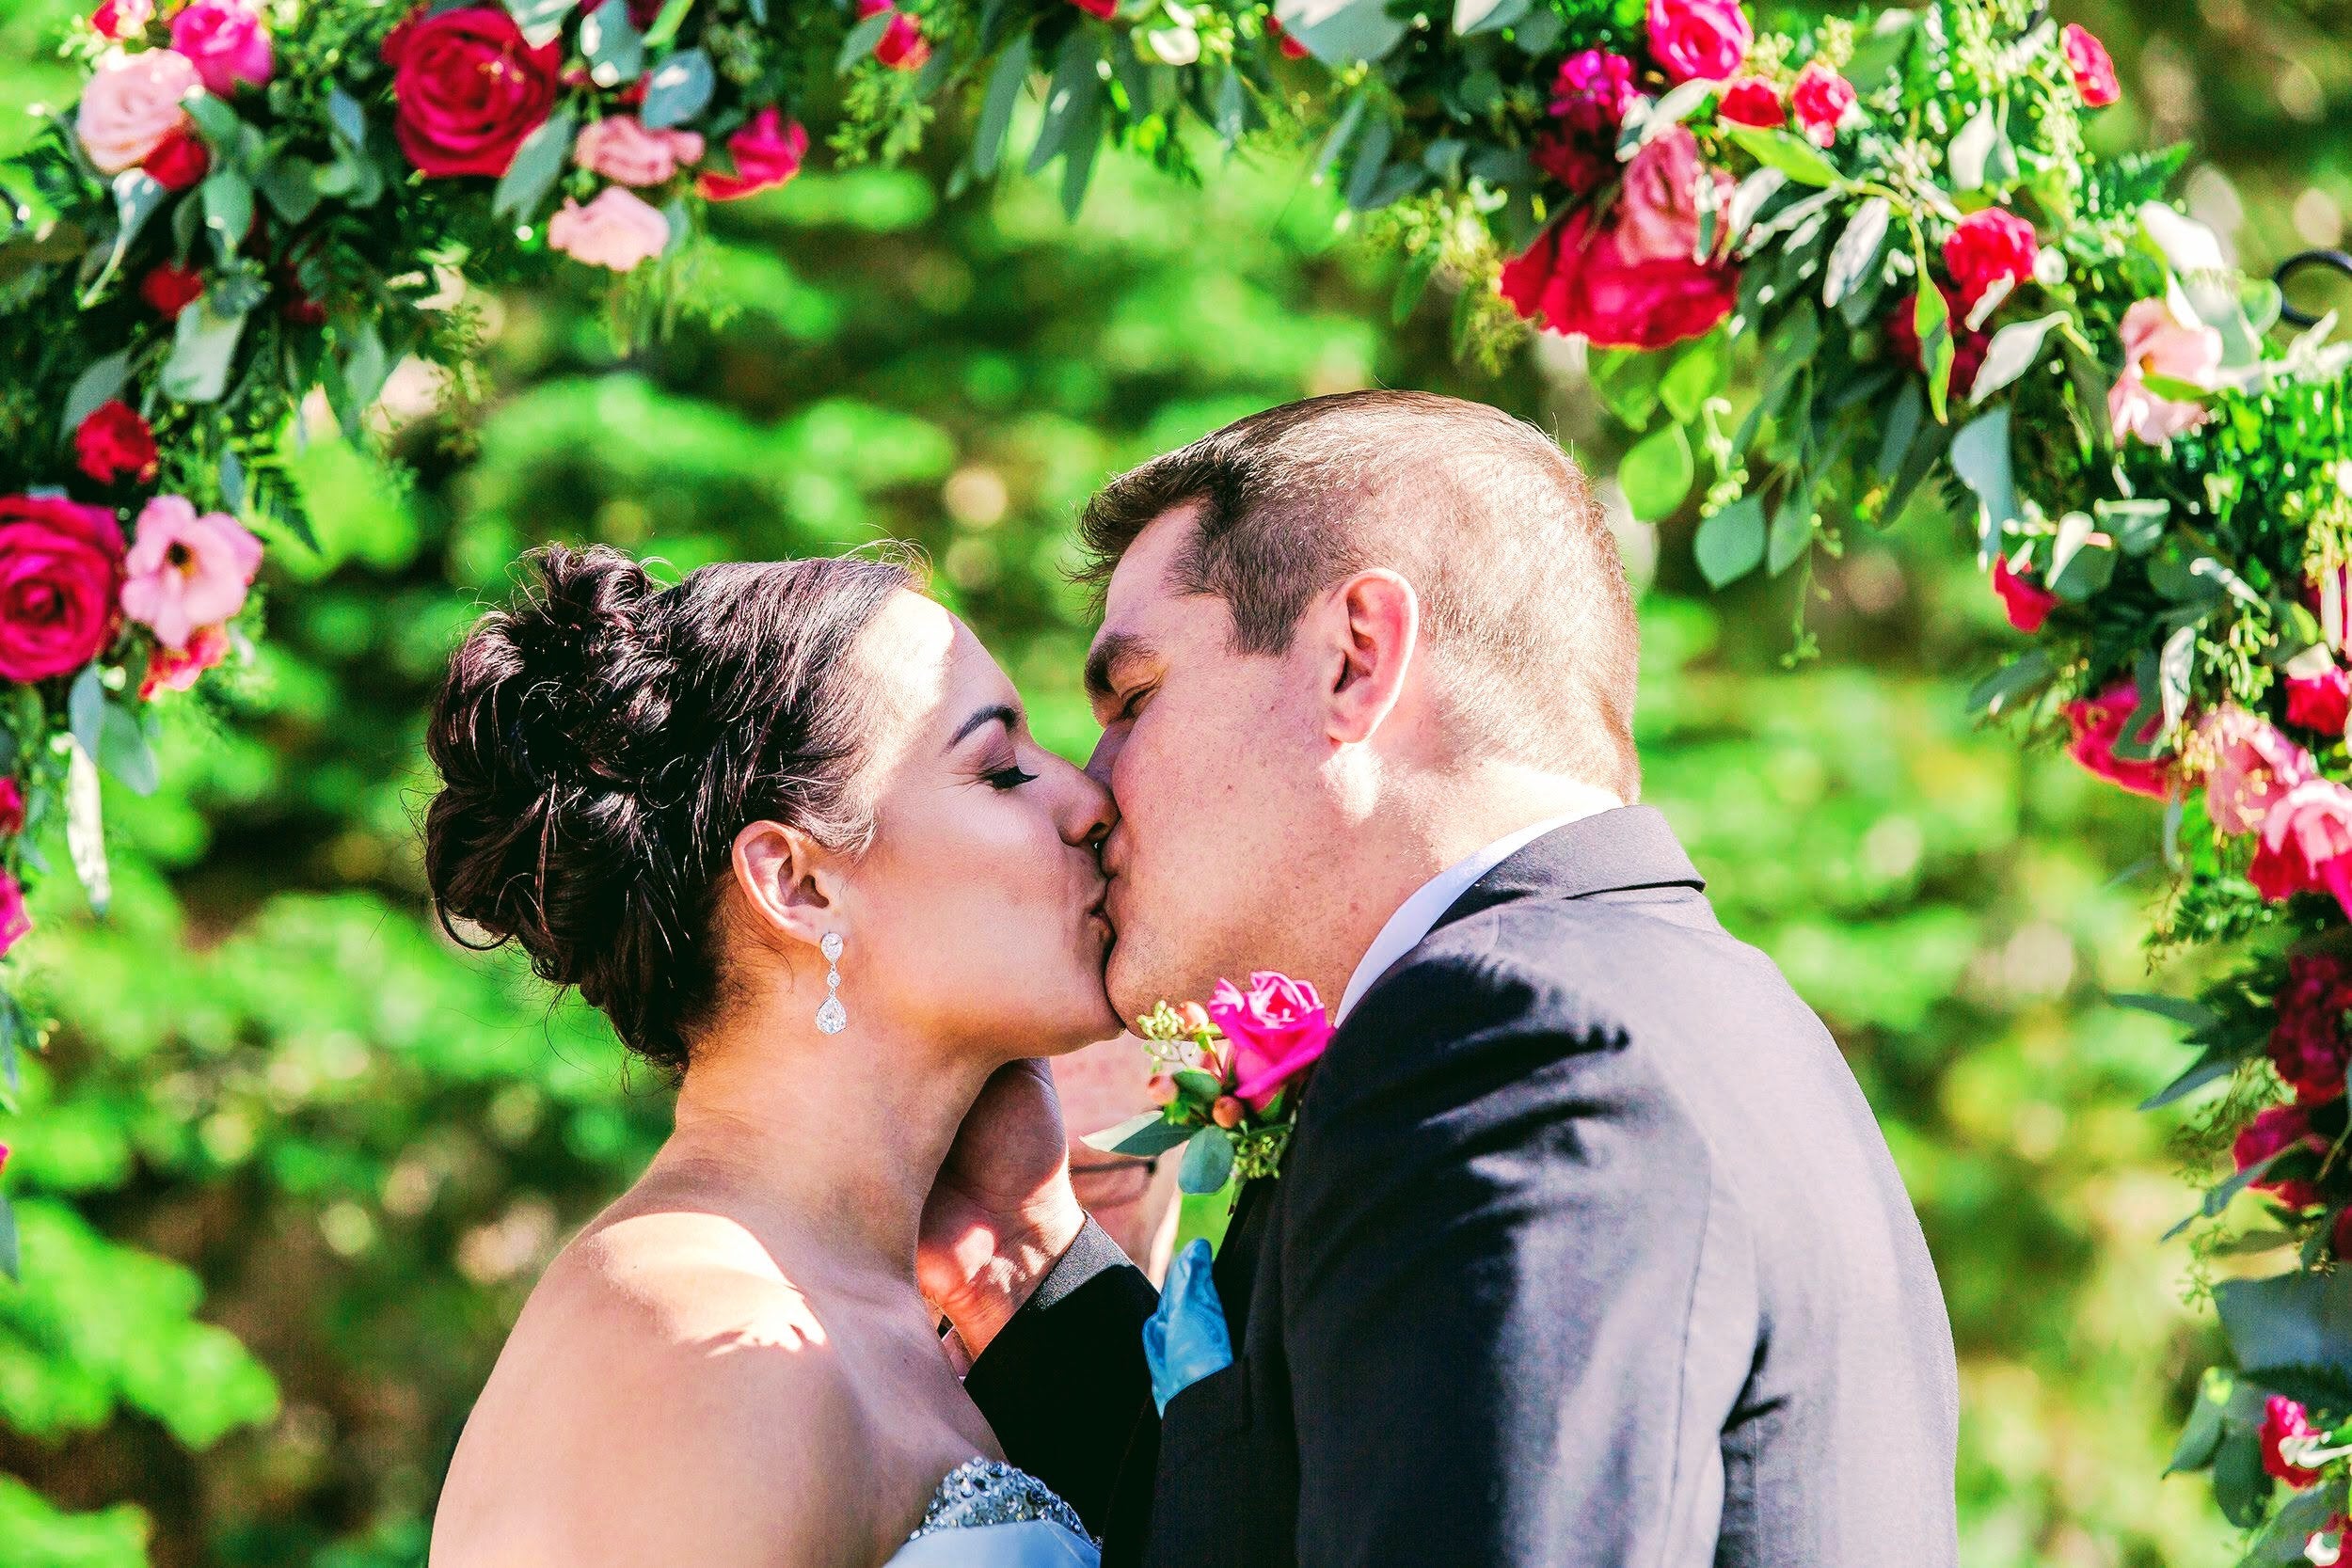 Bride wearing Long Crystal Cubic Zirconia Teardrop Earrings in a silver colored rhodium plated brass setting while kissing her new husband.